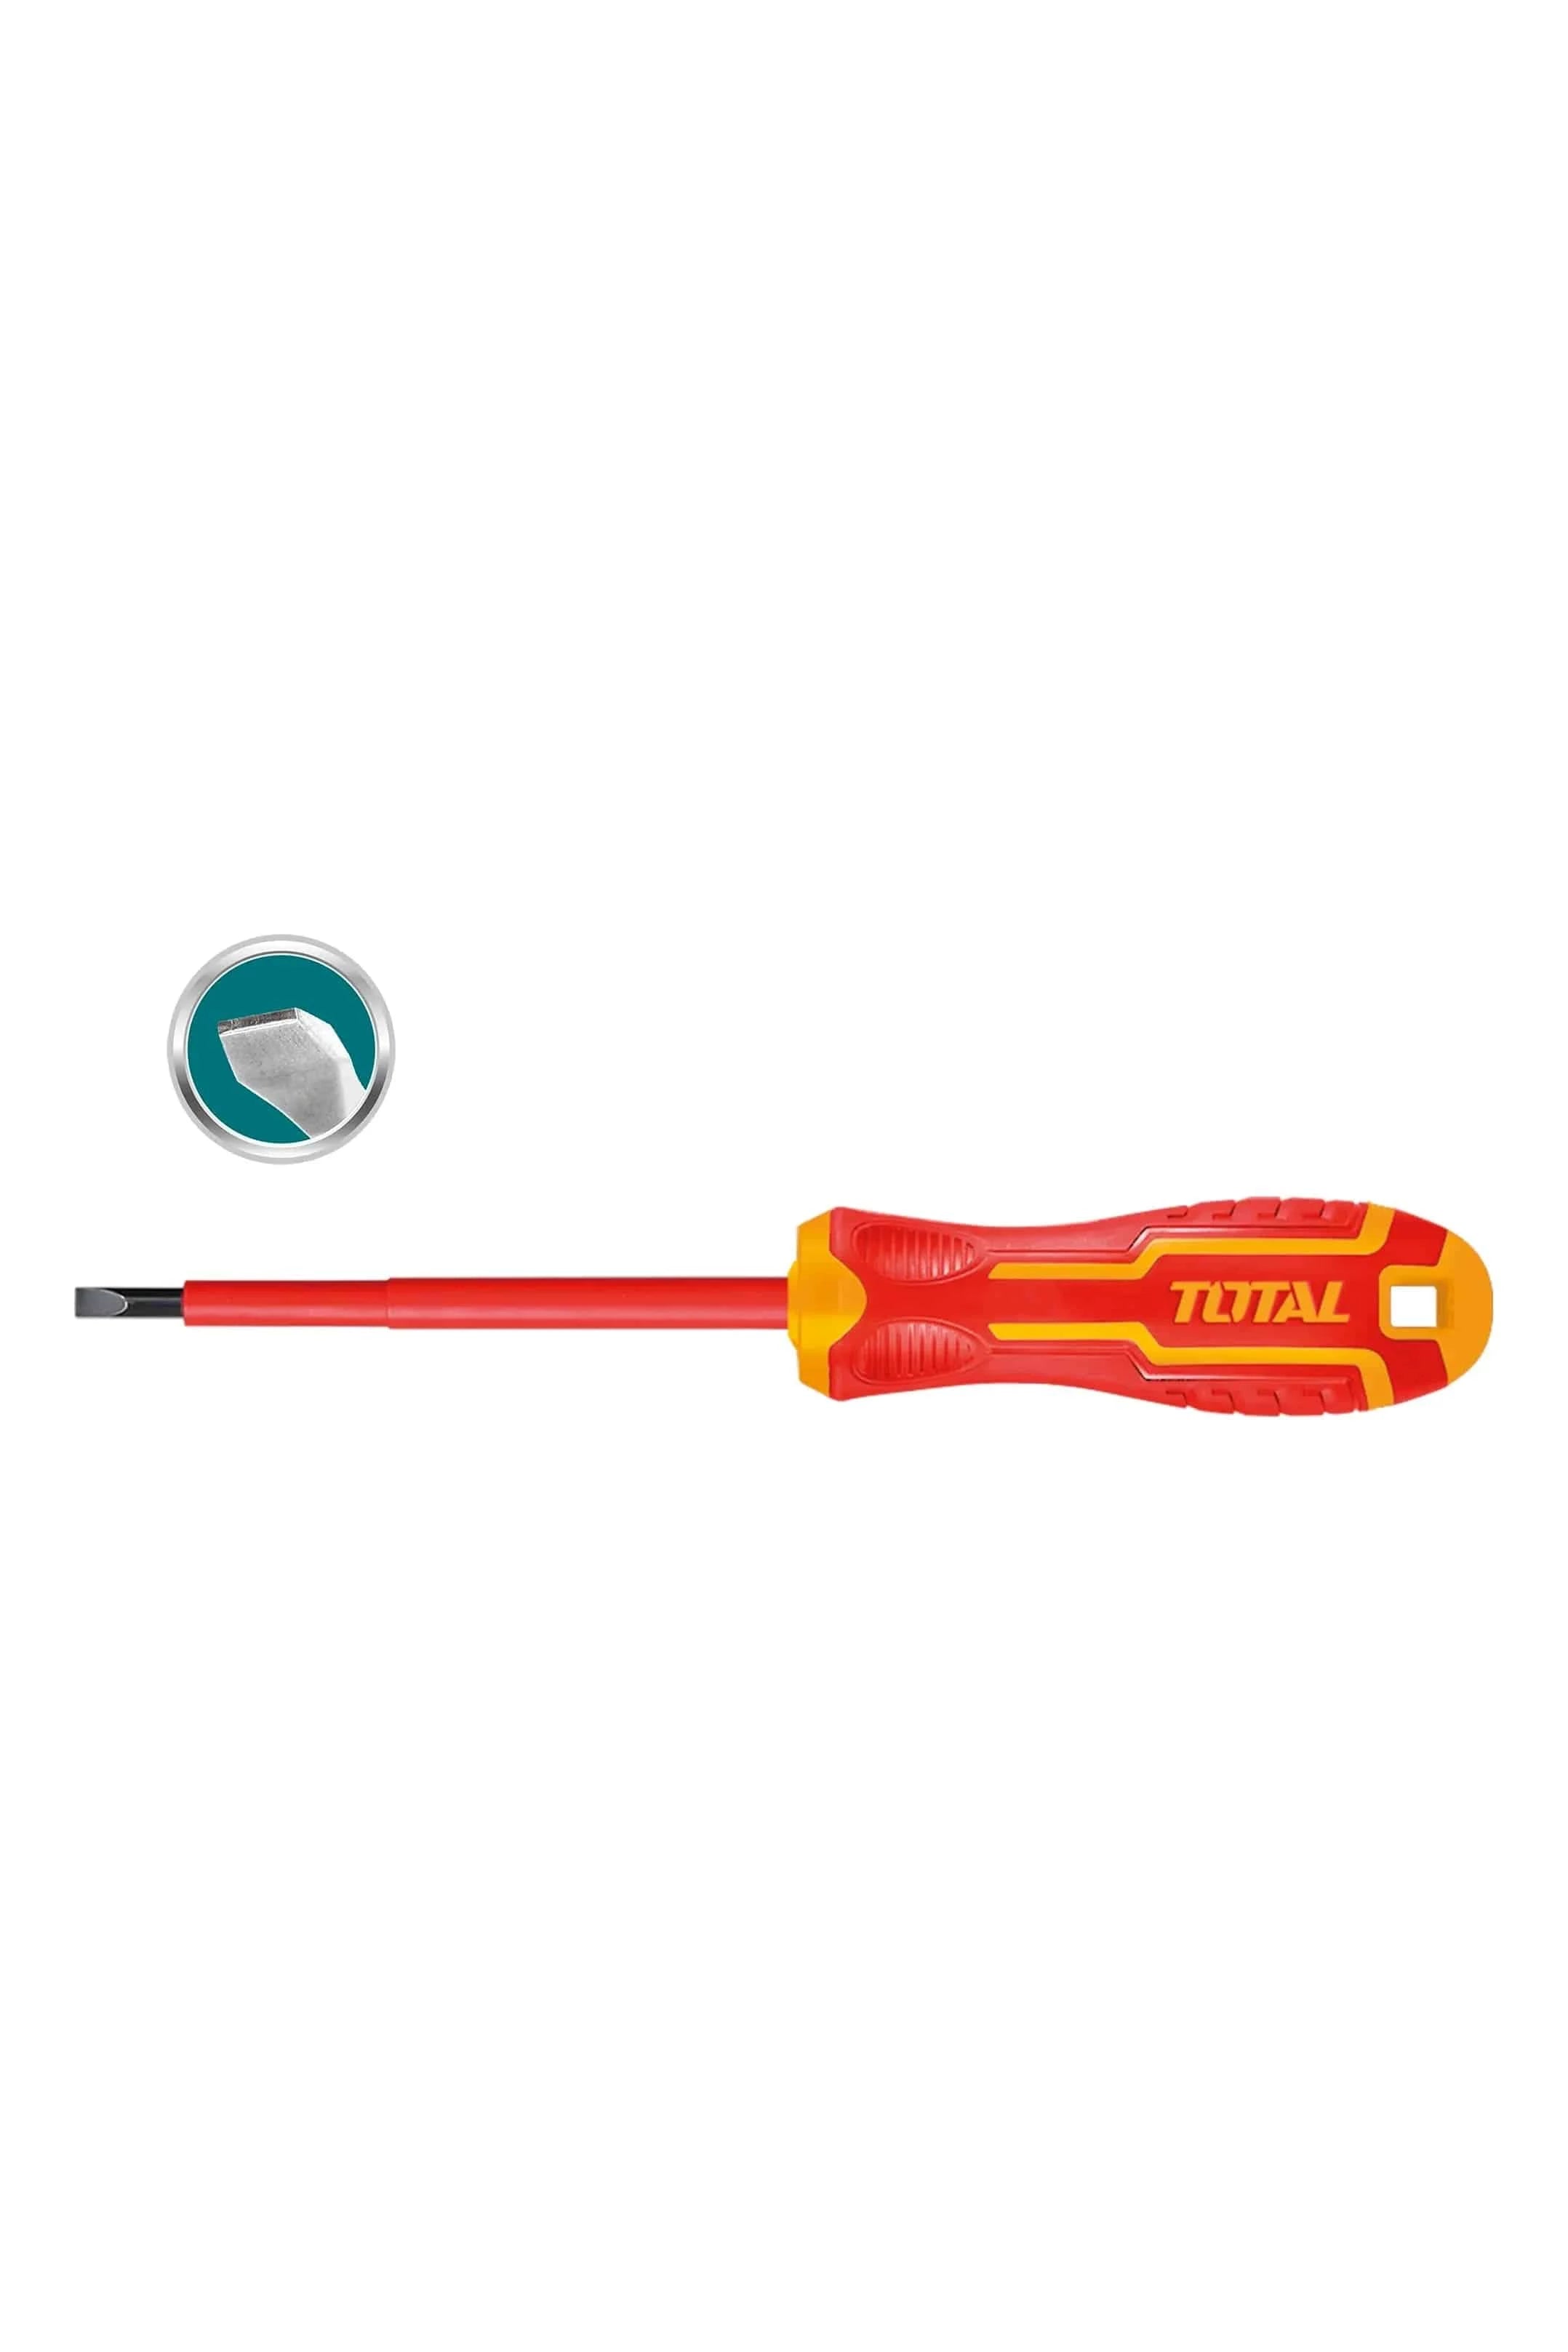 TOTAL INSULATED SCREWDRIVER SL3.0×75 - Elite Renewable Solutions